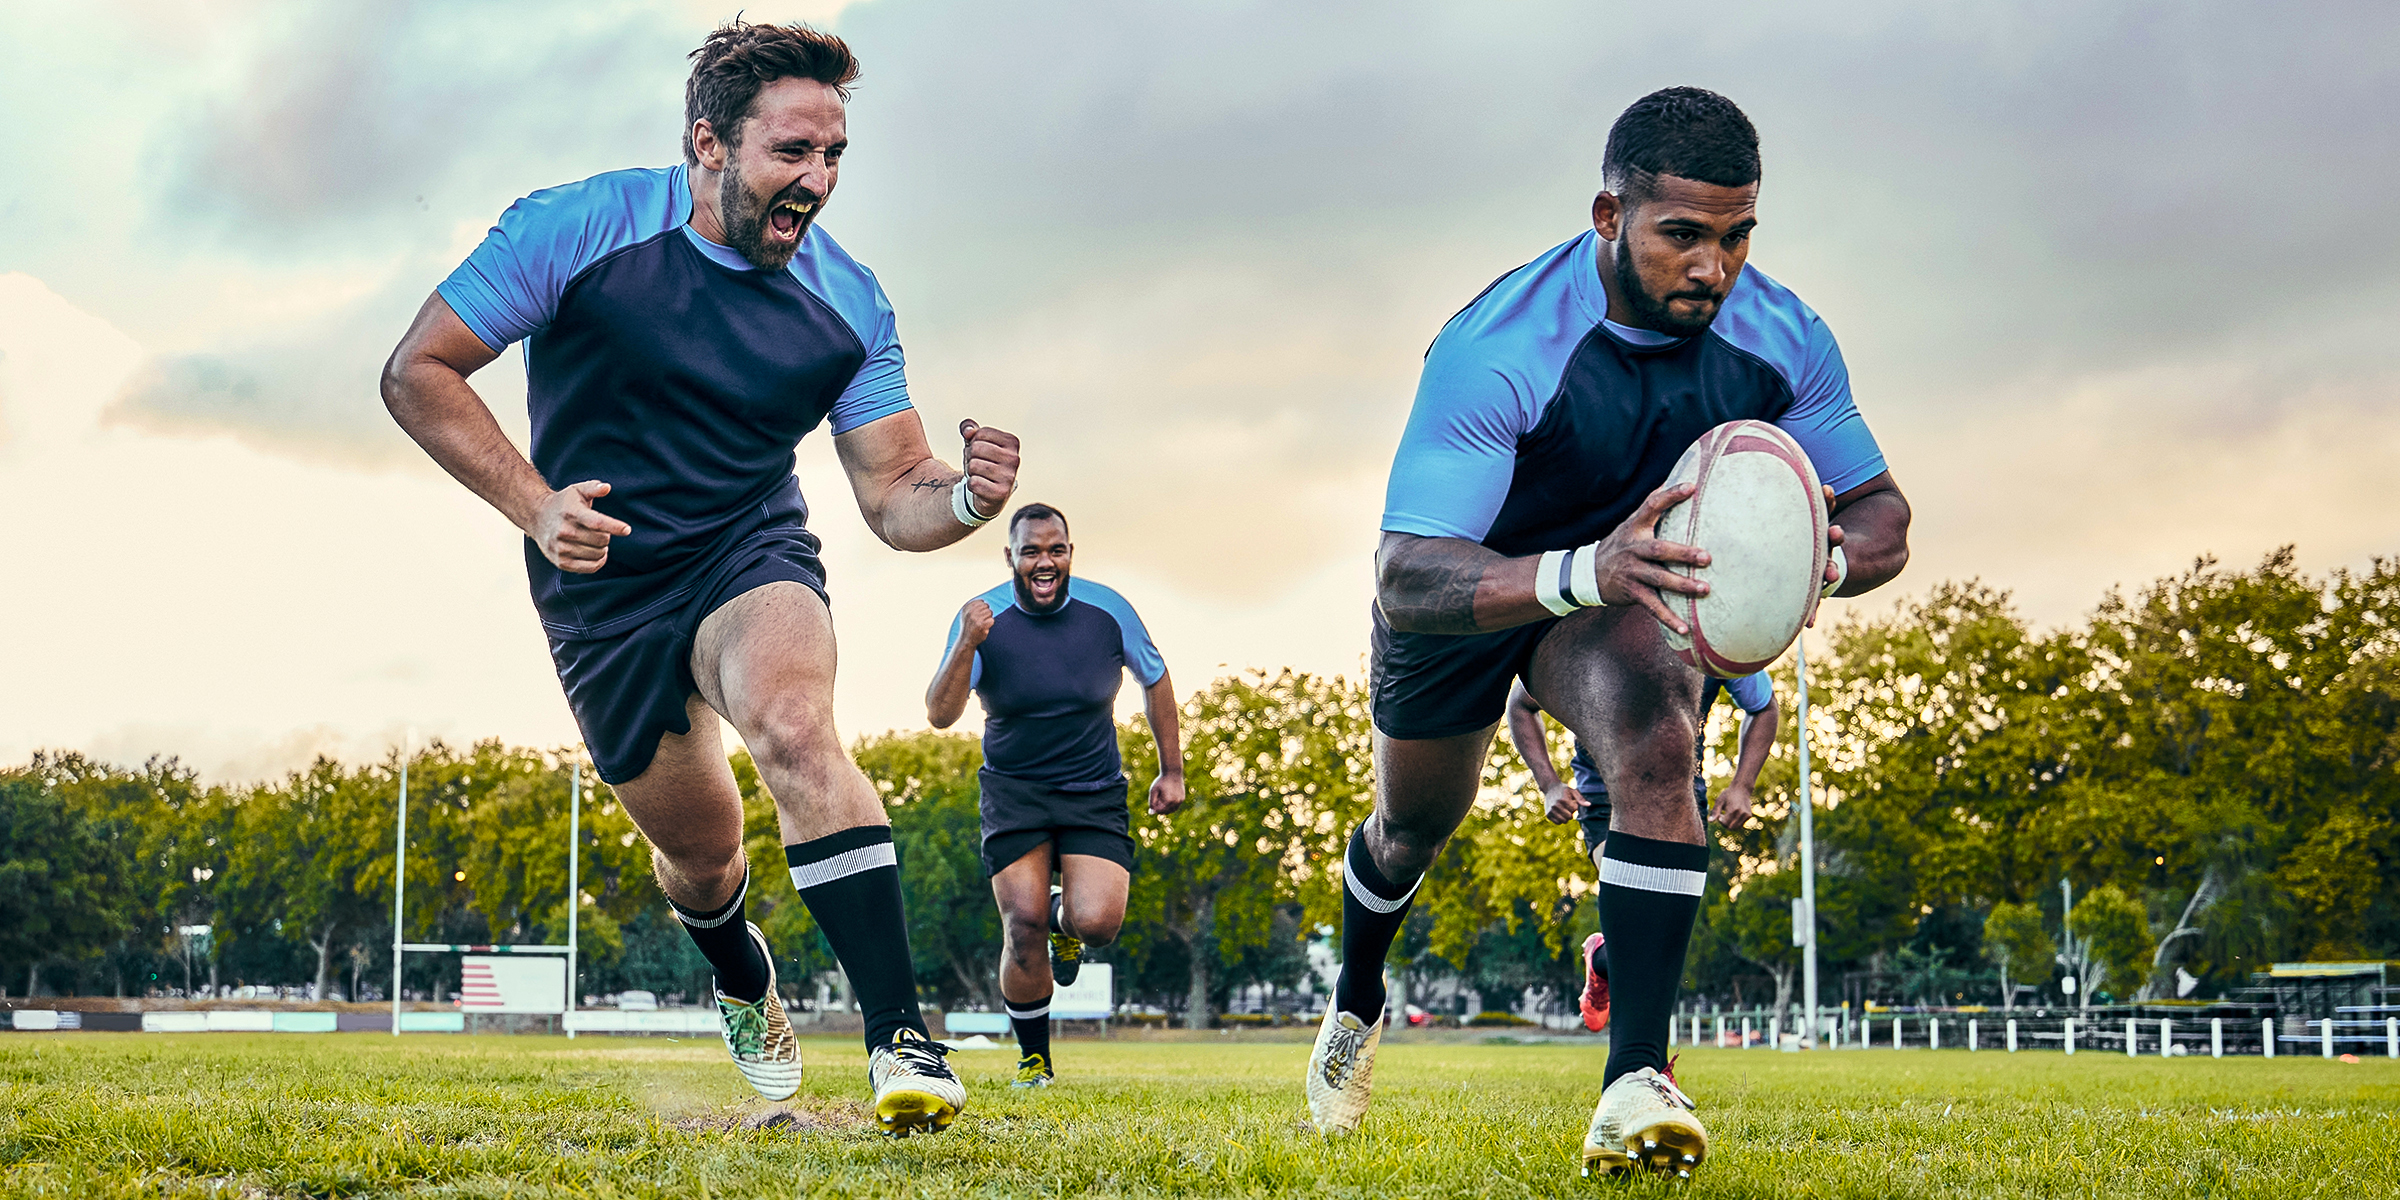 Men playing rugby | Source: Shutterstock